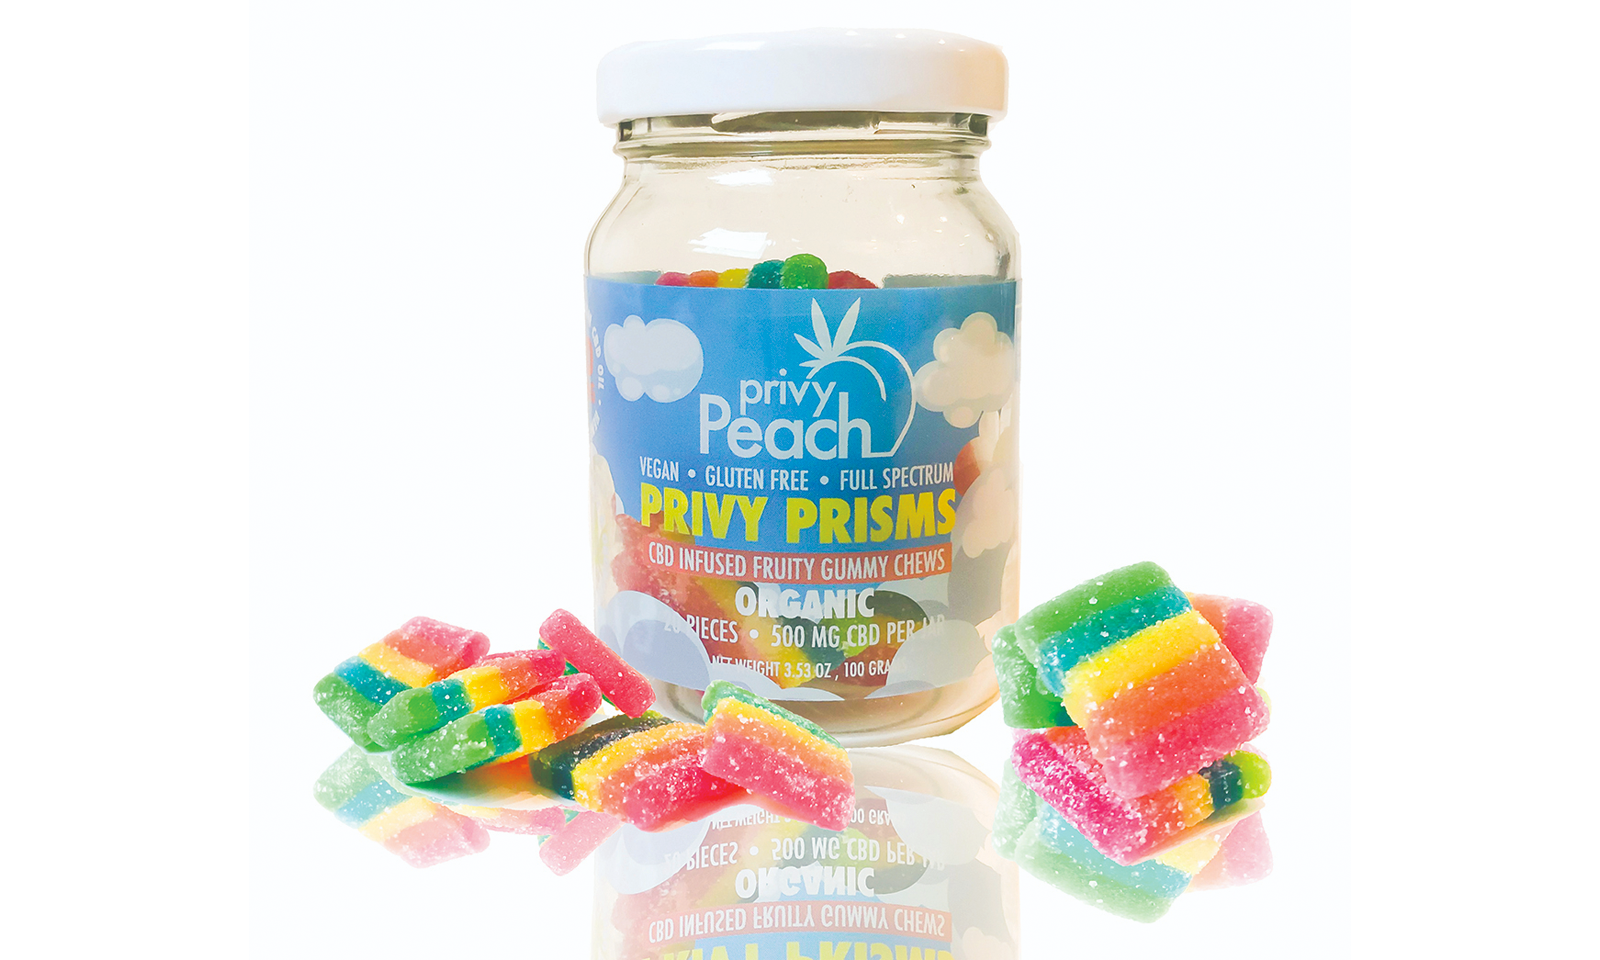 Entrenue Shipping CBD-infused Bodycare, Gummies from Privy Peach